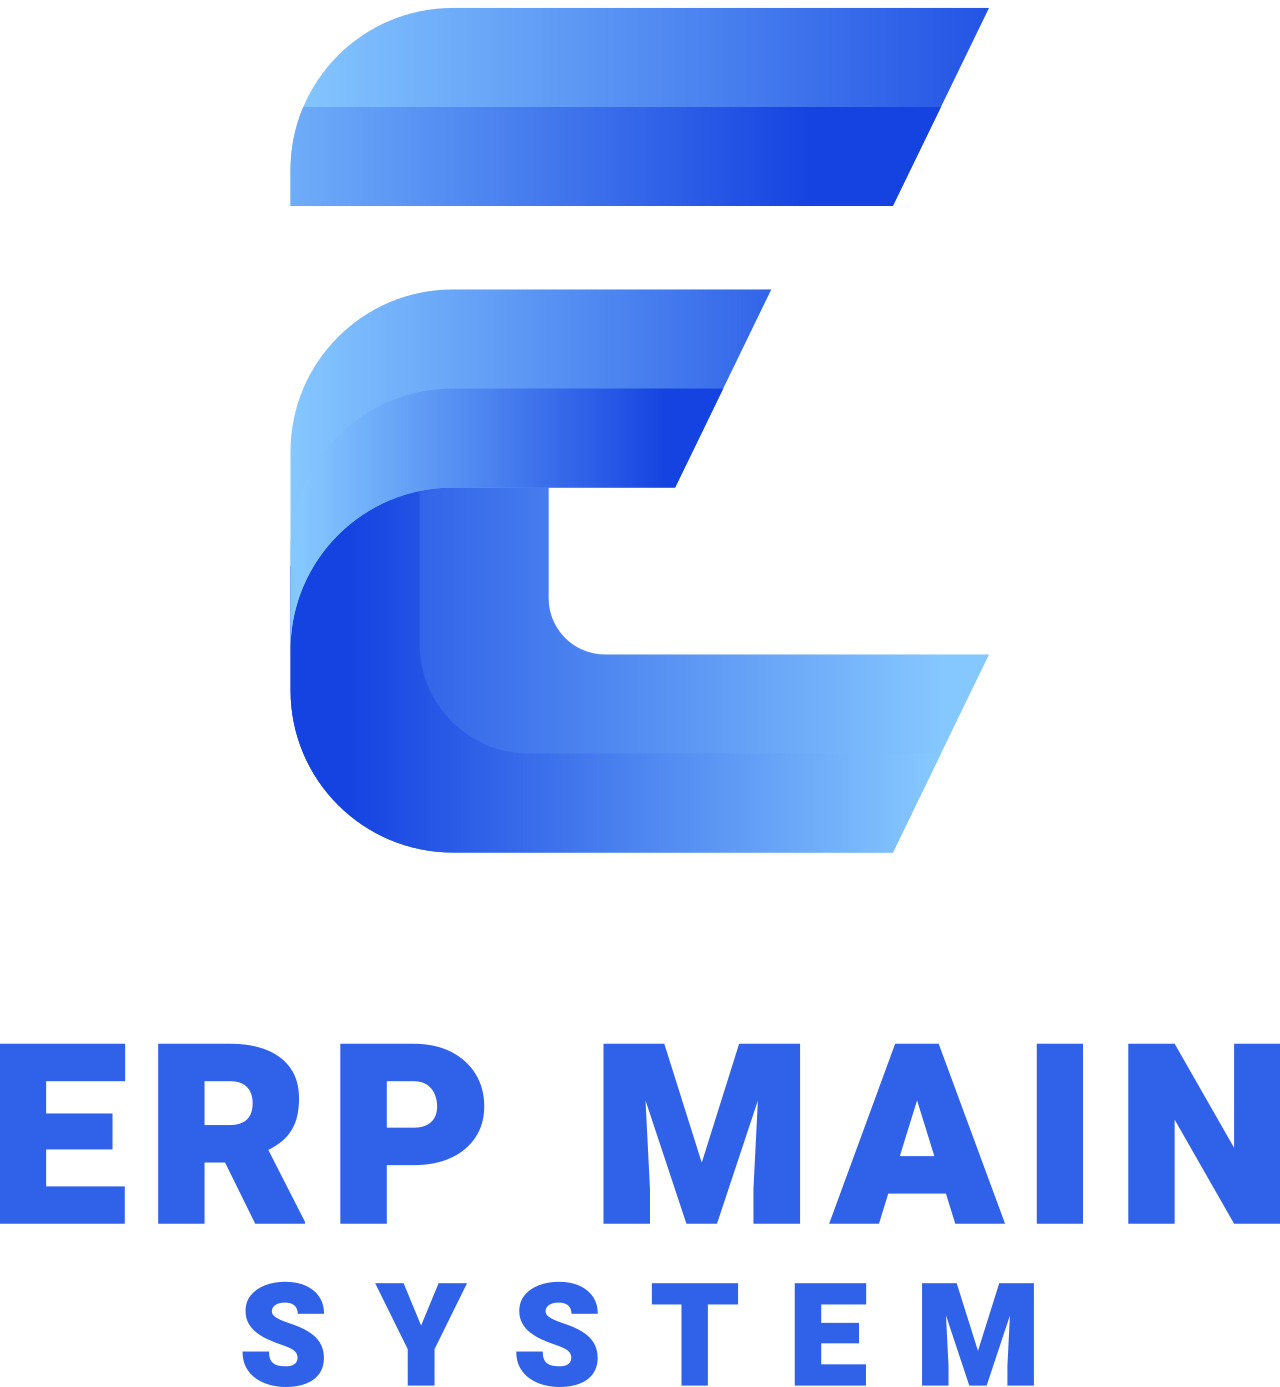 ERP MAIN's web page